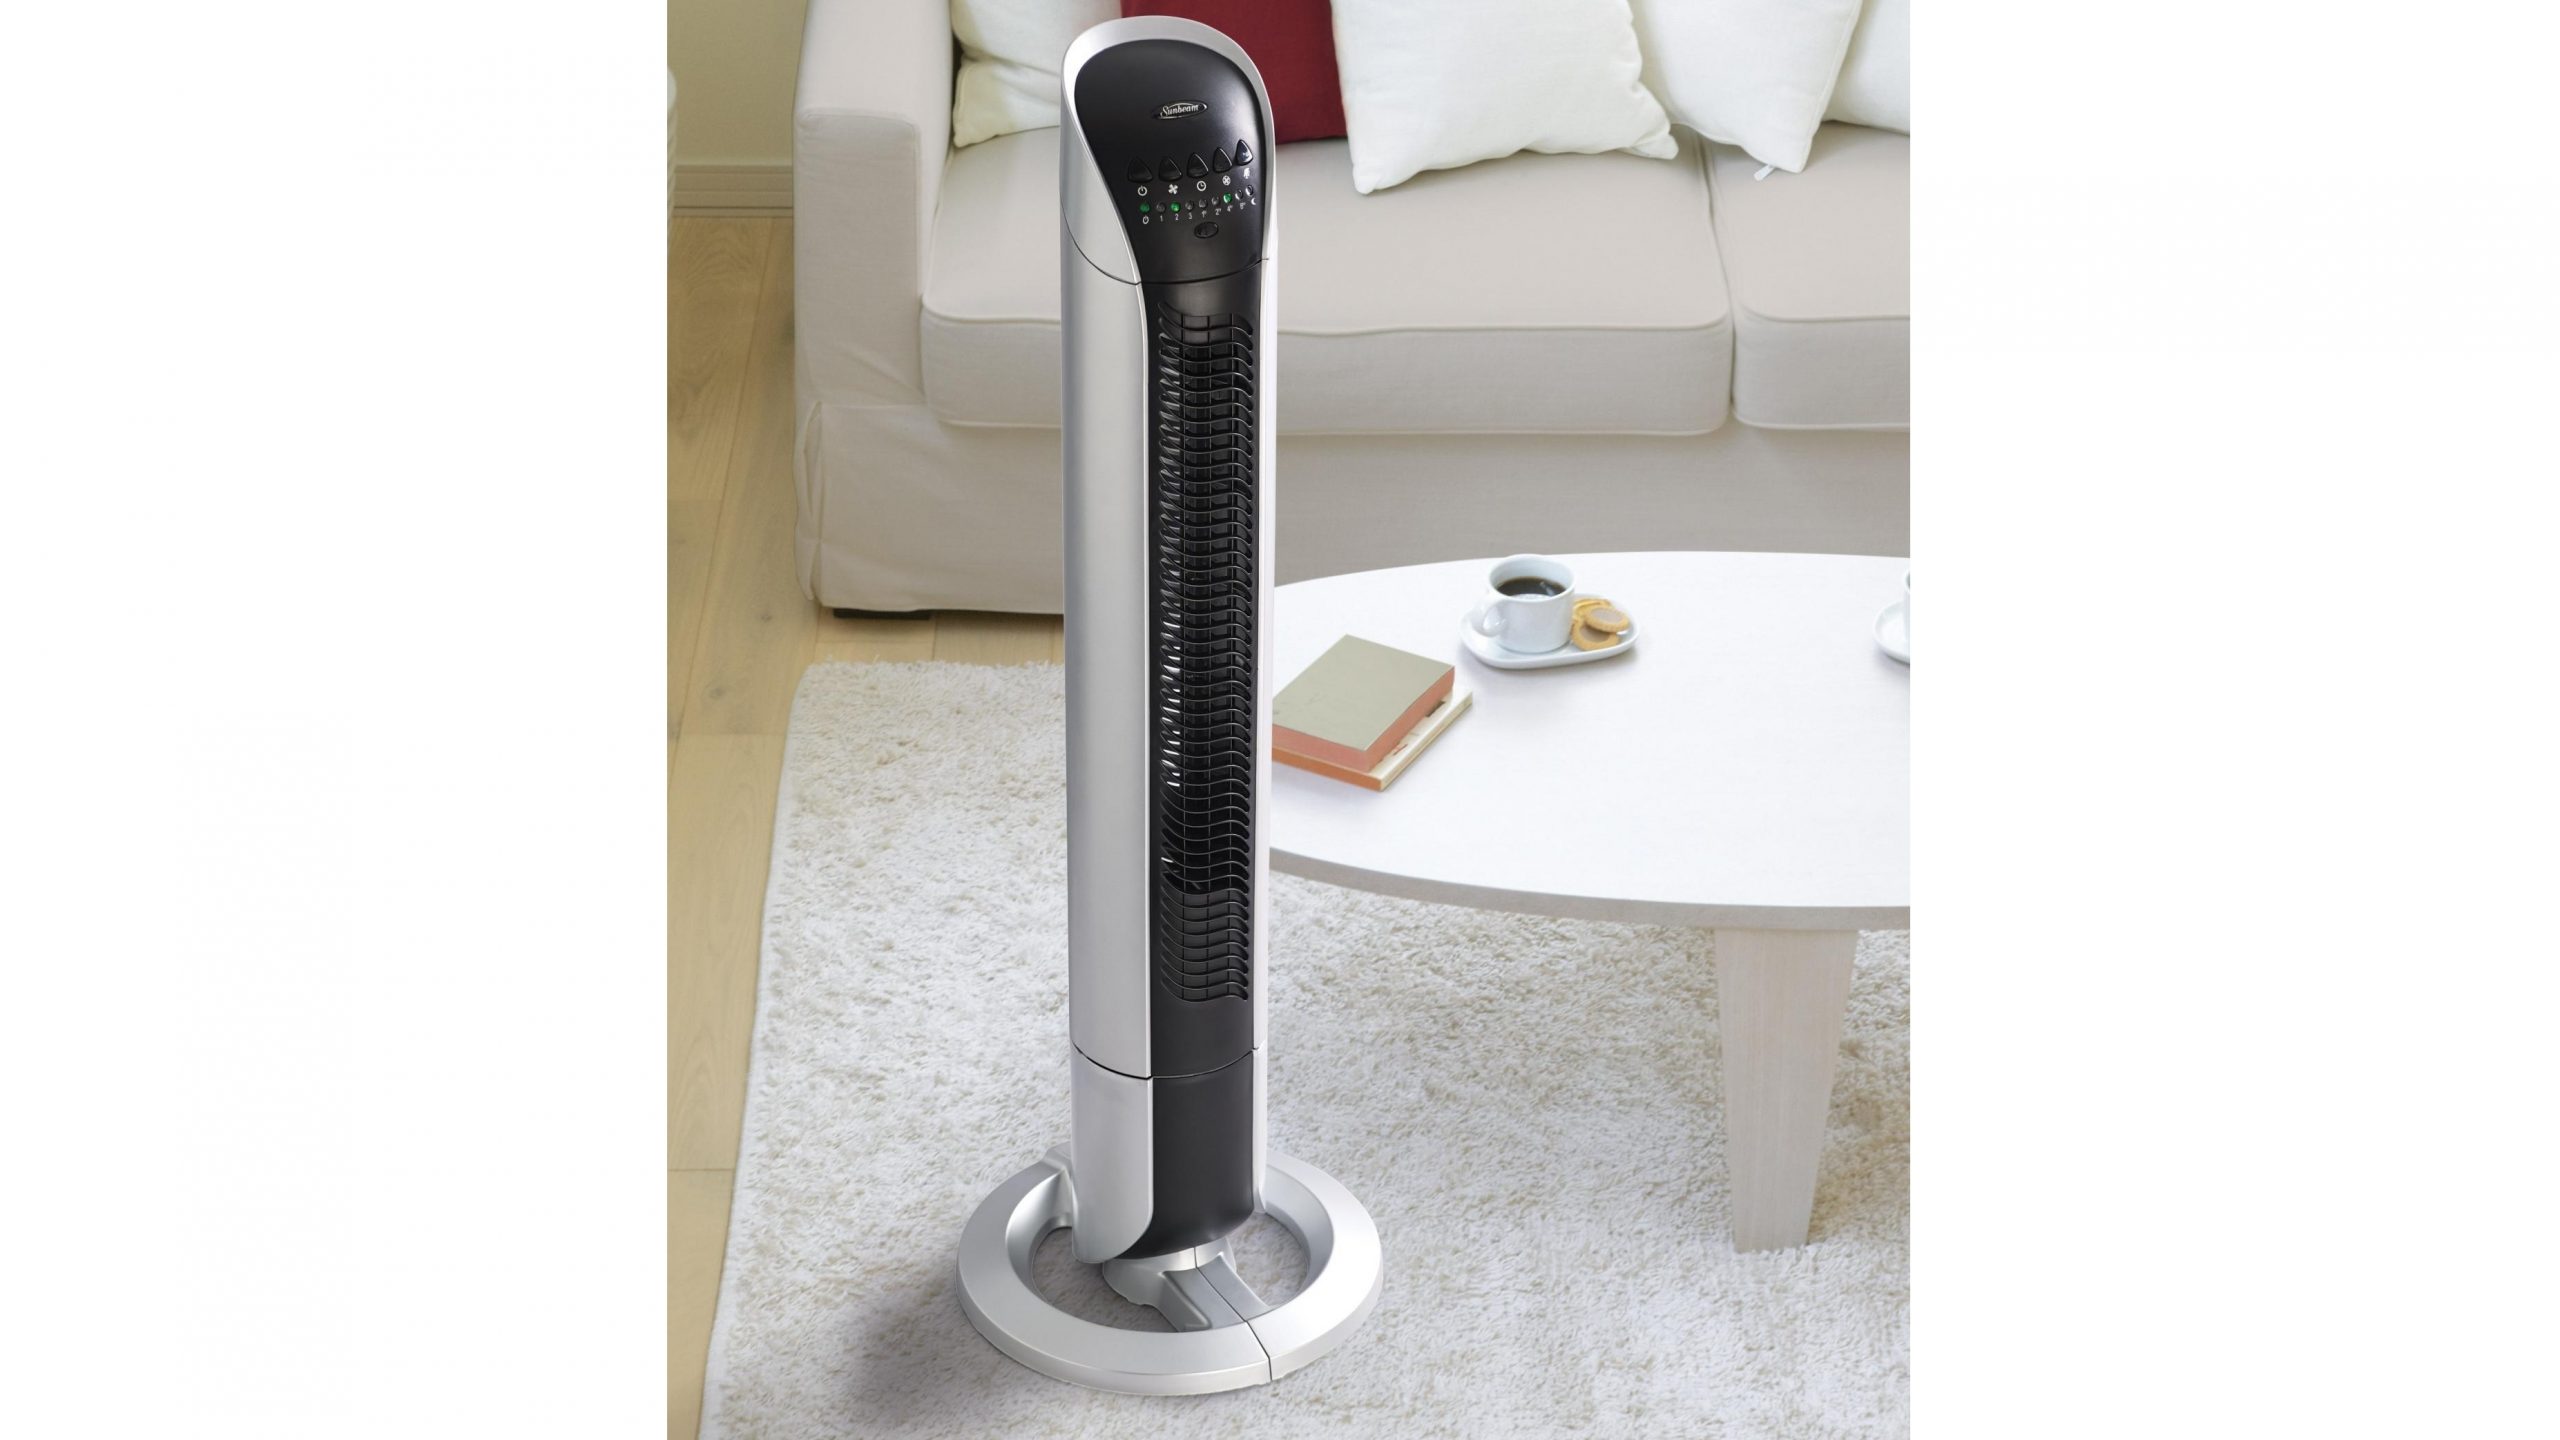 Sunbeam Fa7250 Tower Fan With Night Mode pertaining to dimensions 3707 X 2085